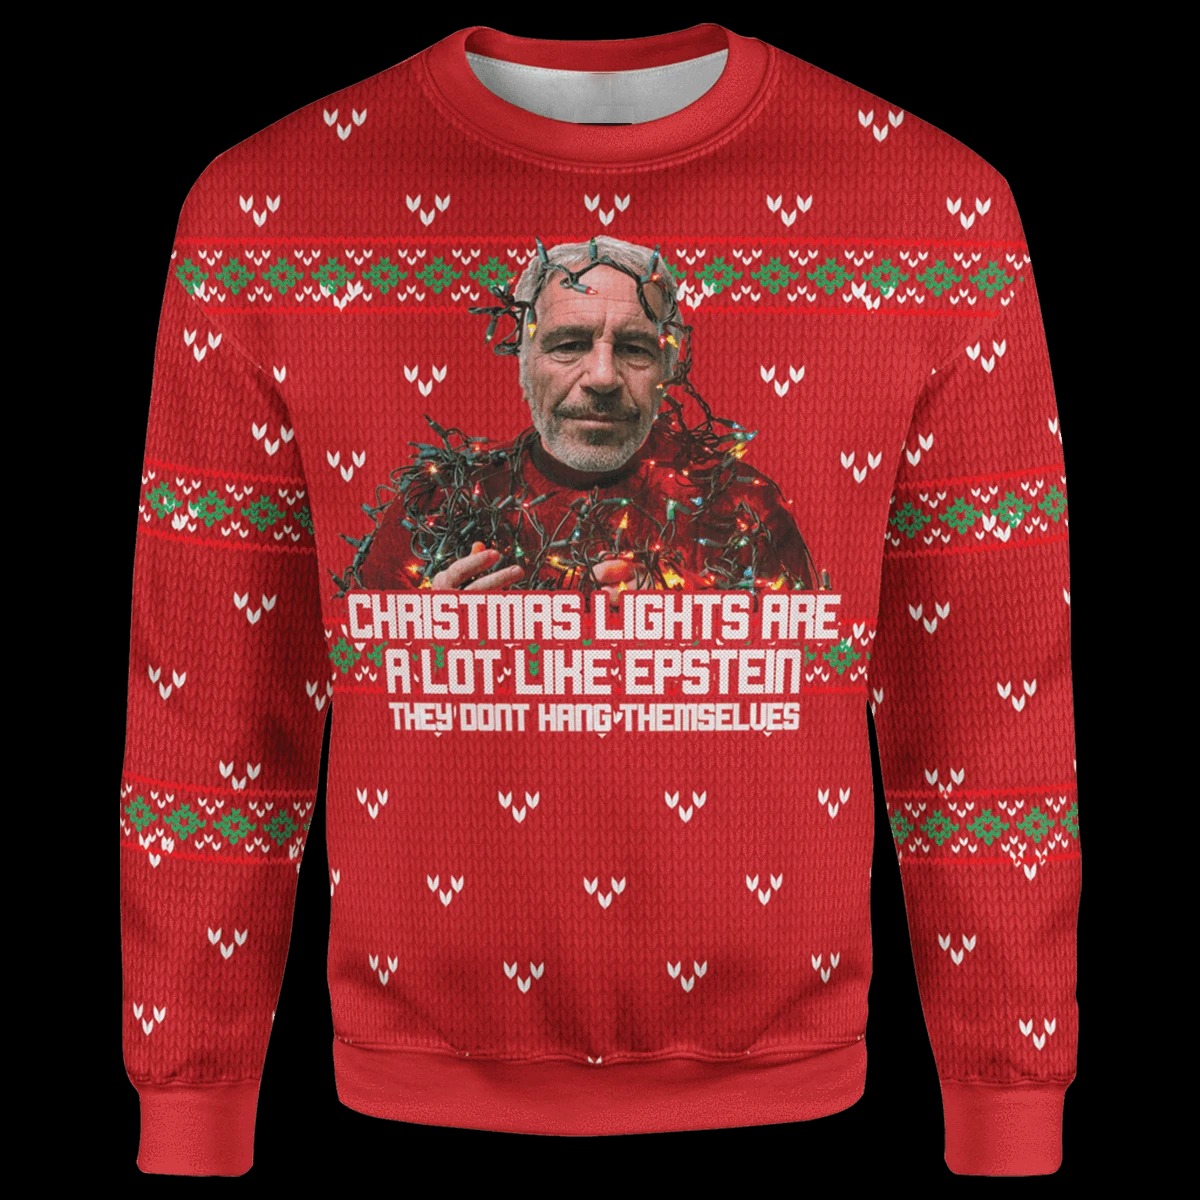 Christmas lights are a lot like epstein ugly sweater and jumper